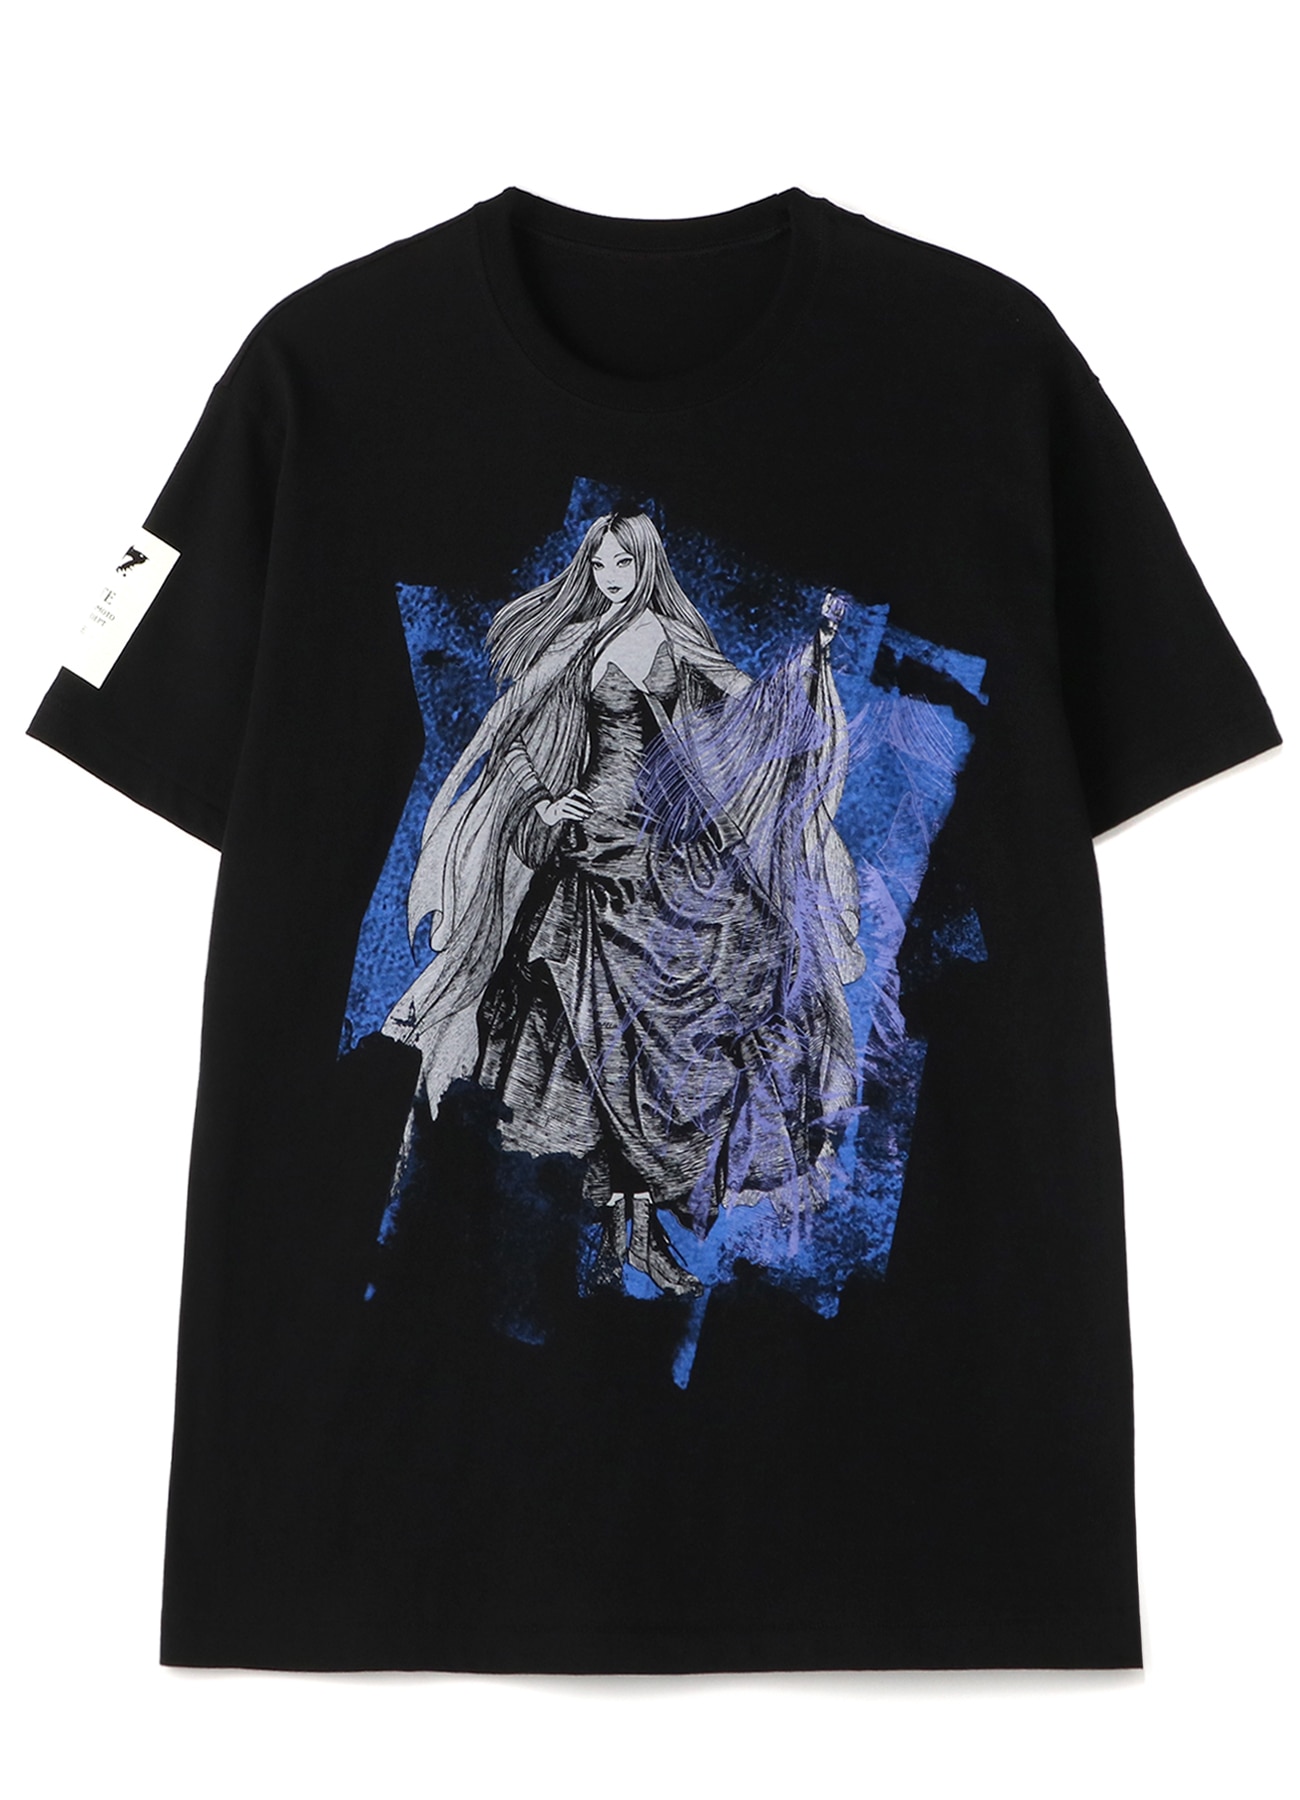 S'YTE × Junji ITO COLLABORATION “TOMIE” T-SHIRTS 